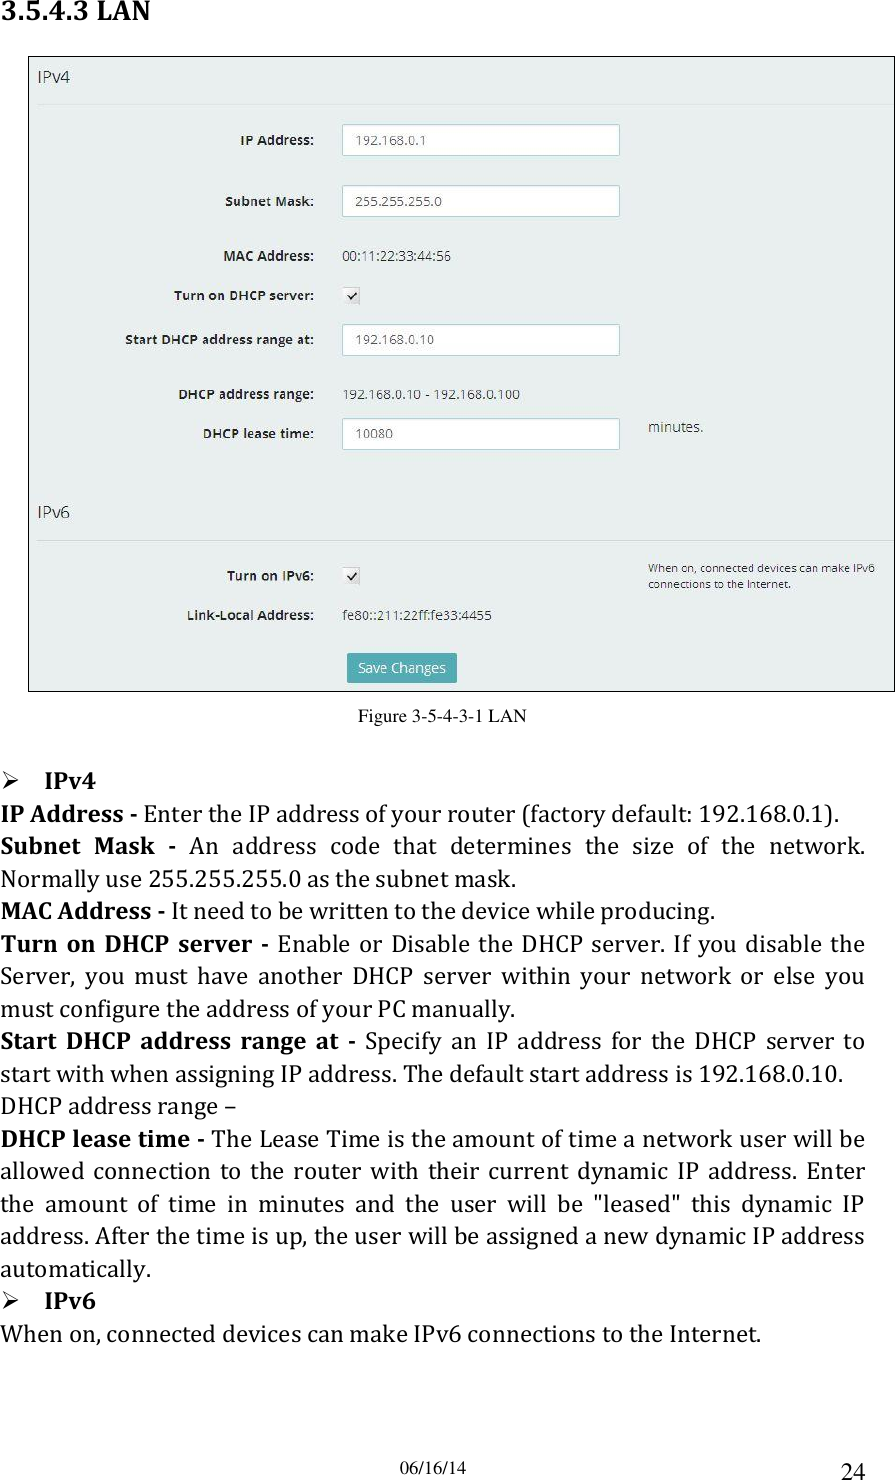 06/16/14 24 3.5.4.3 LAN  Figure 3-5-4-3-1 LAN   IPv4 IP Address - Enter the IP address of your router (factory default: 192.168.0.1). Subnet  Mask  -  An  address  code  that  determines  the  size  of  the  network. Normally use 255.255.255.0 as the subnet mask. MAC Address - It need to be written to the device while producing. Turn  on  DHCP server  -  Enable or Disable  the  DHCP  server.  If  you disable  the Server,  you  must  have  another  DHCP  server  within  your  network  or  else  you must configure the address of your PC manually. Start  DHCP  address  range  at  -  Specify  an  IP  address  for  the  DHCP  server  to start with when assigning IP address. The default start address is 192.168.0.10. DHCP address range –   DHCP lease time - The Lease Time is the amount of time a network user will be allowed  connection  to  the  router  with  their  current  dynamic  IP  address.  Enter the  amount  of  time  in  minutes  and  the  user  will  be  &quot;leased&quot;  this  dynamic  IP address. After the time is up, the user will be assigned a new dynamic IP address automatically.  IPv6 When on, connected devices can make IPv6 connections to the Internet. 